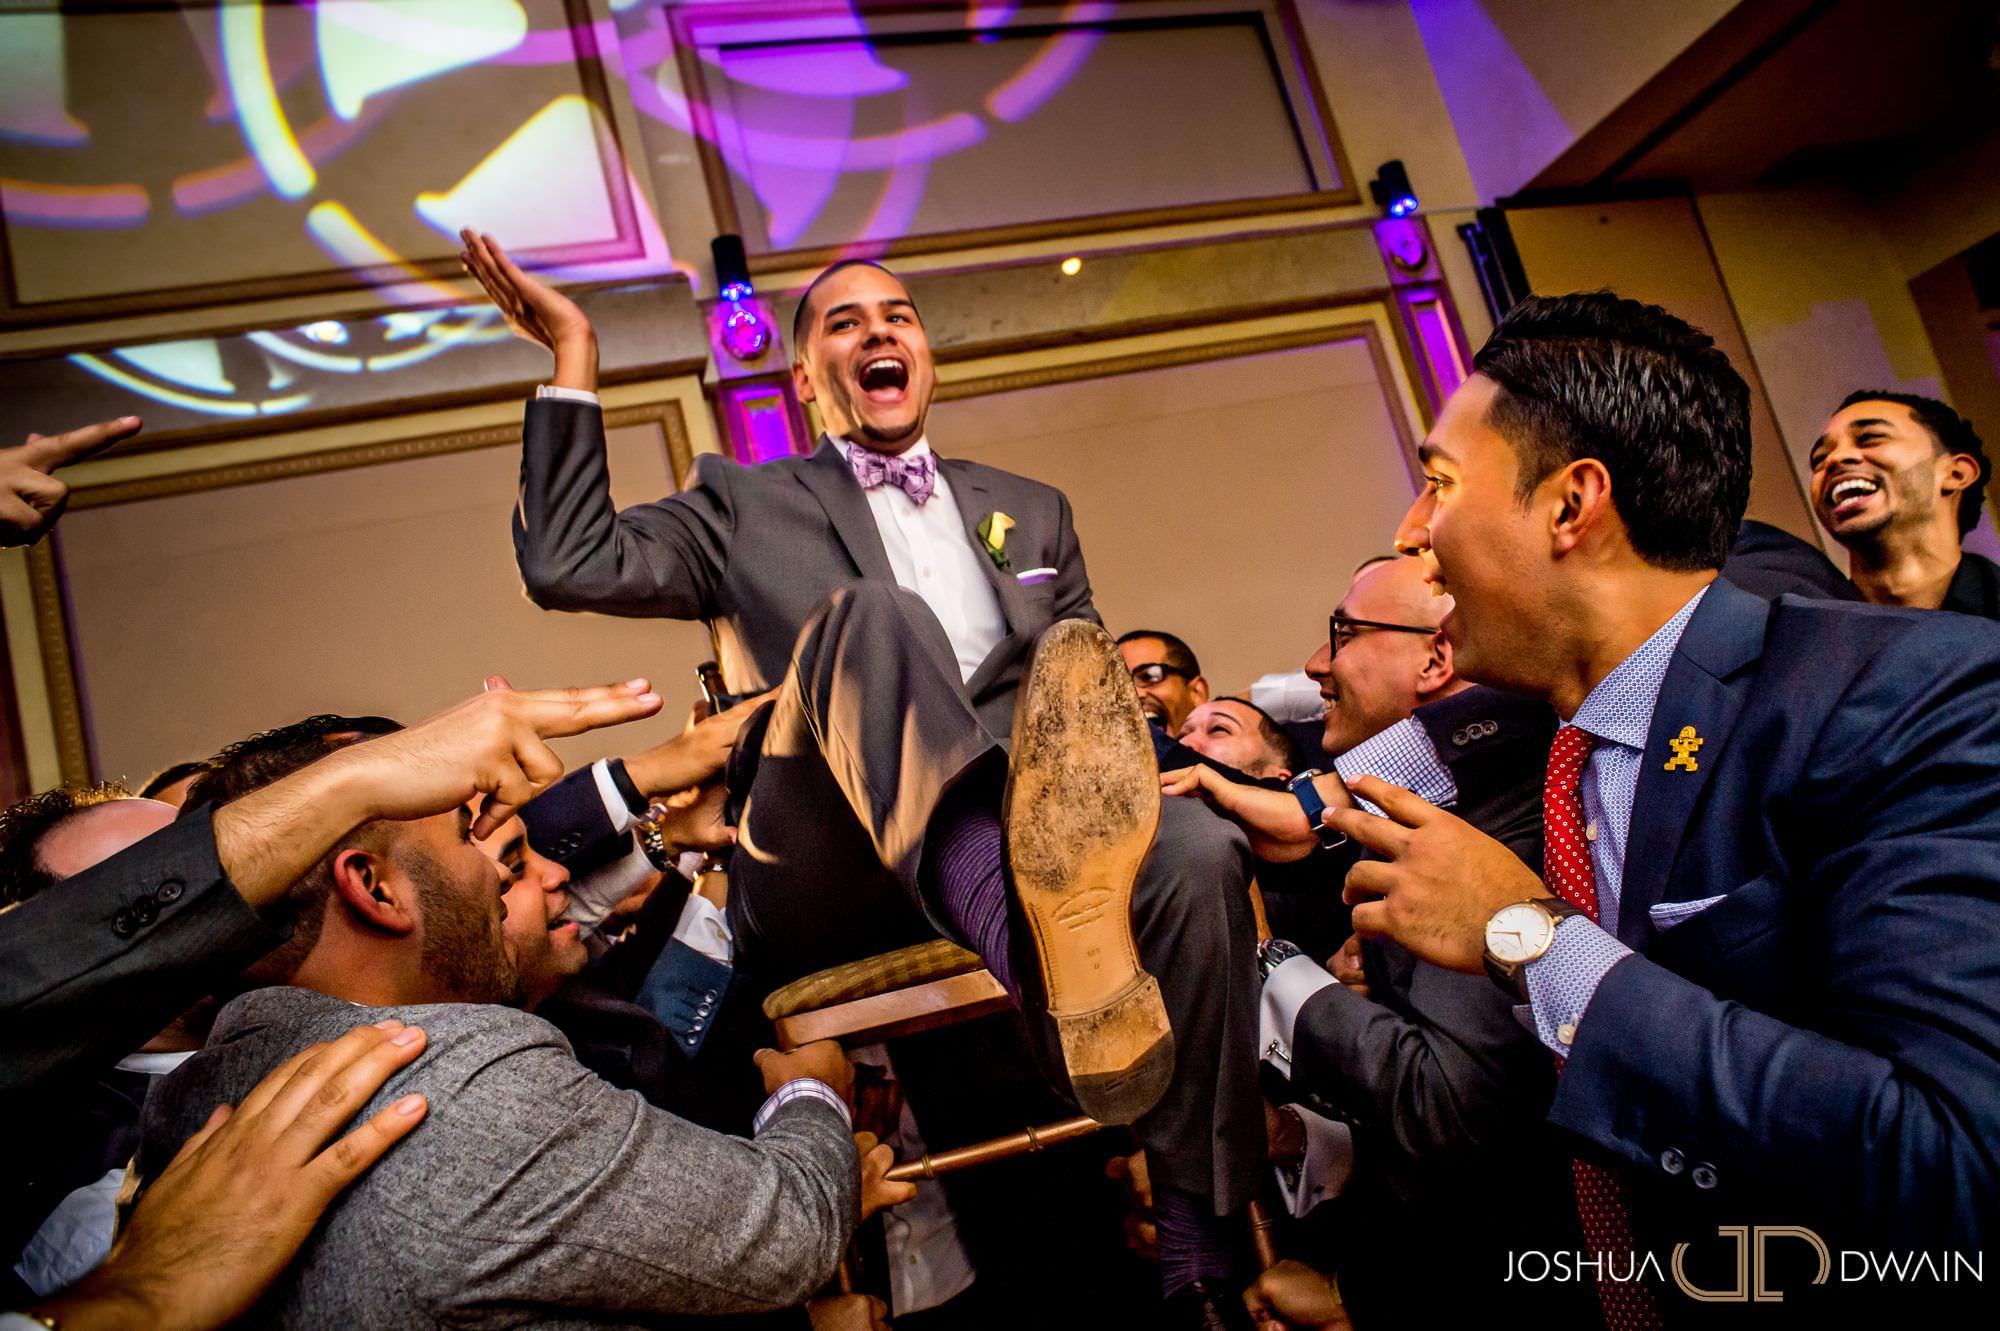 Nicole & Maurico's wedding at the Tosca Marquee in the Bronx, NY